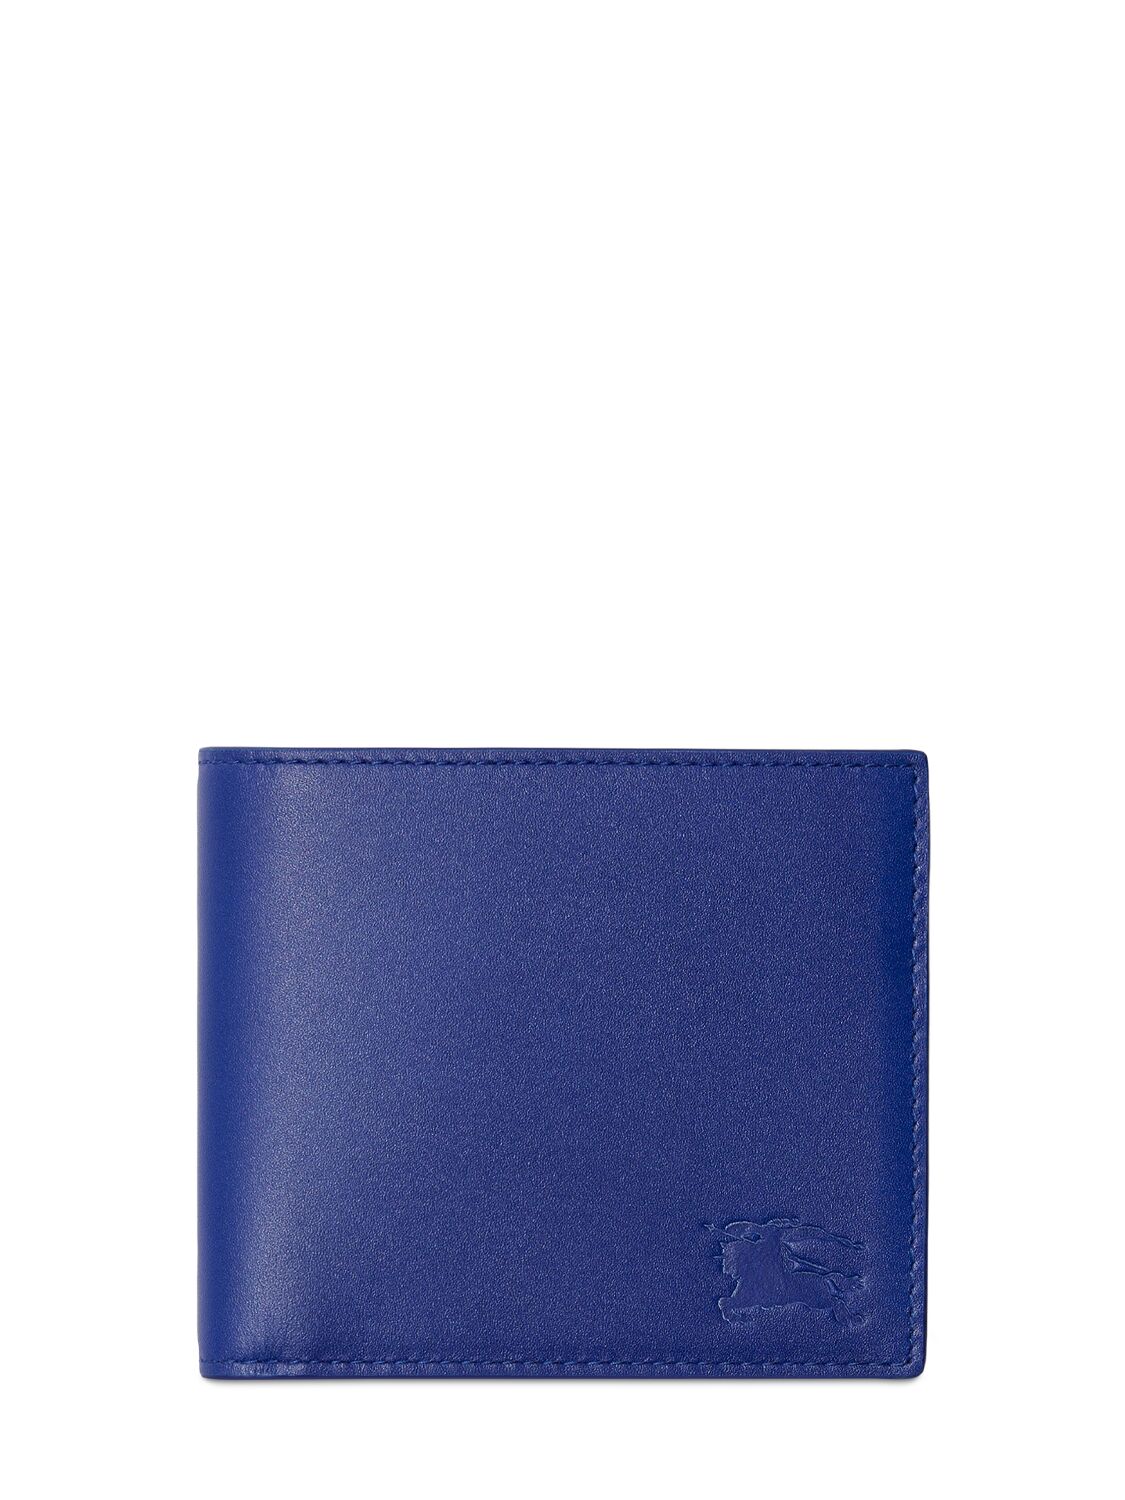 Burberry Check Embossed Leather Wallet In Blue